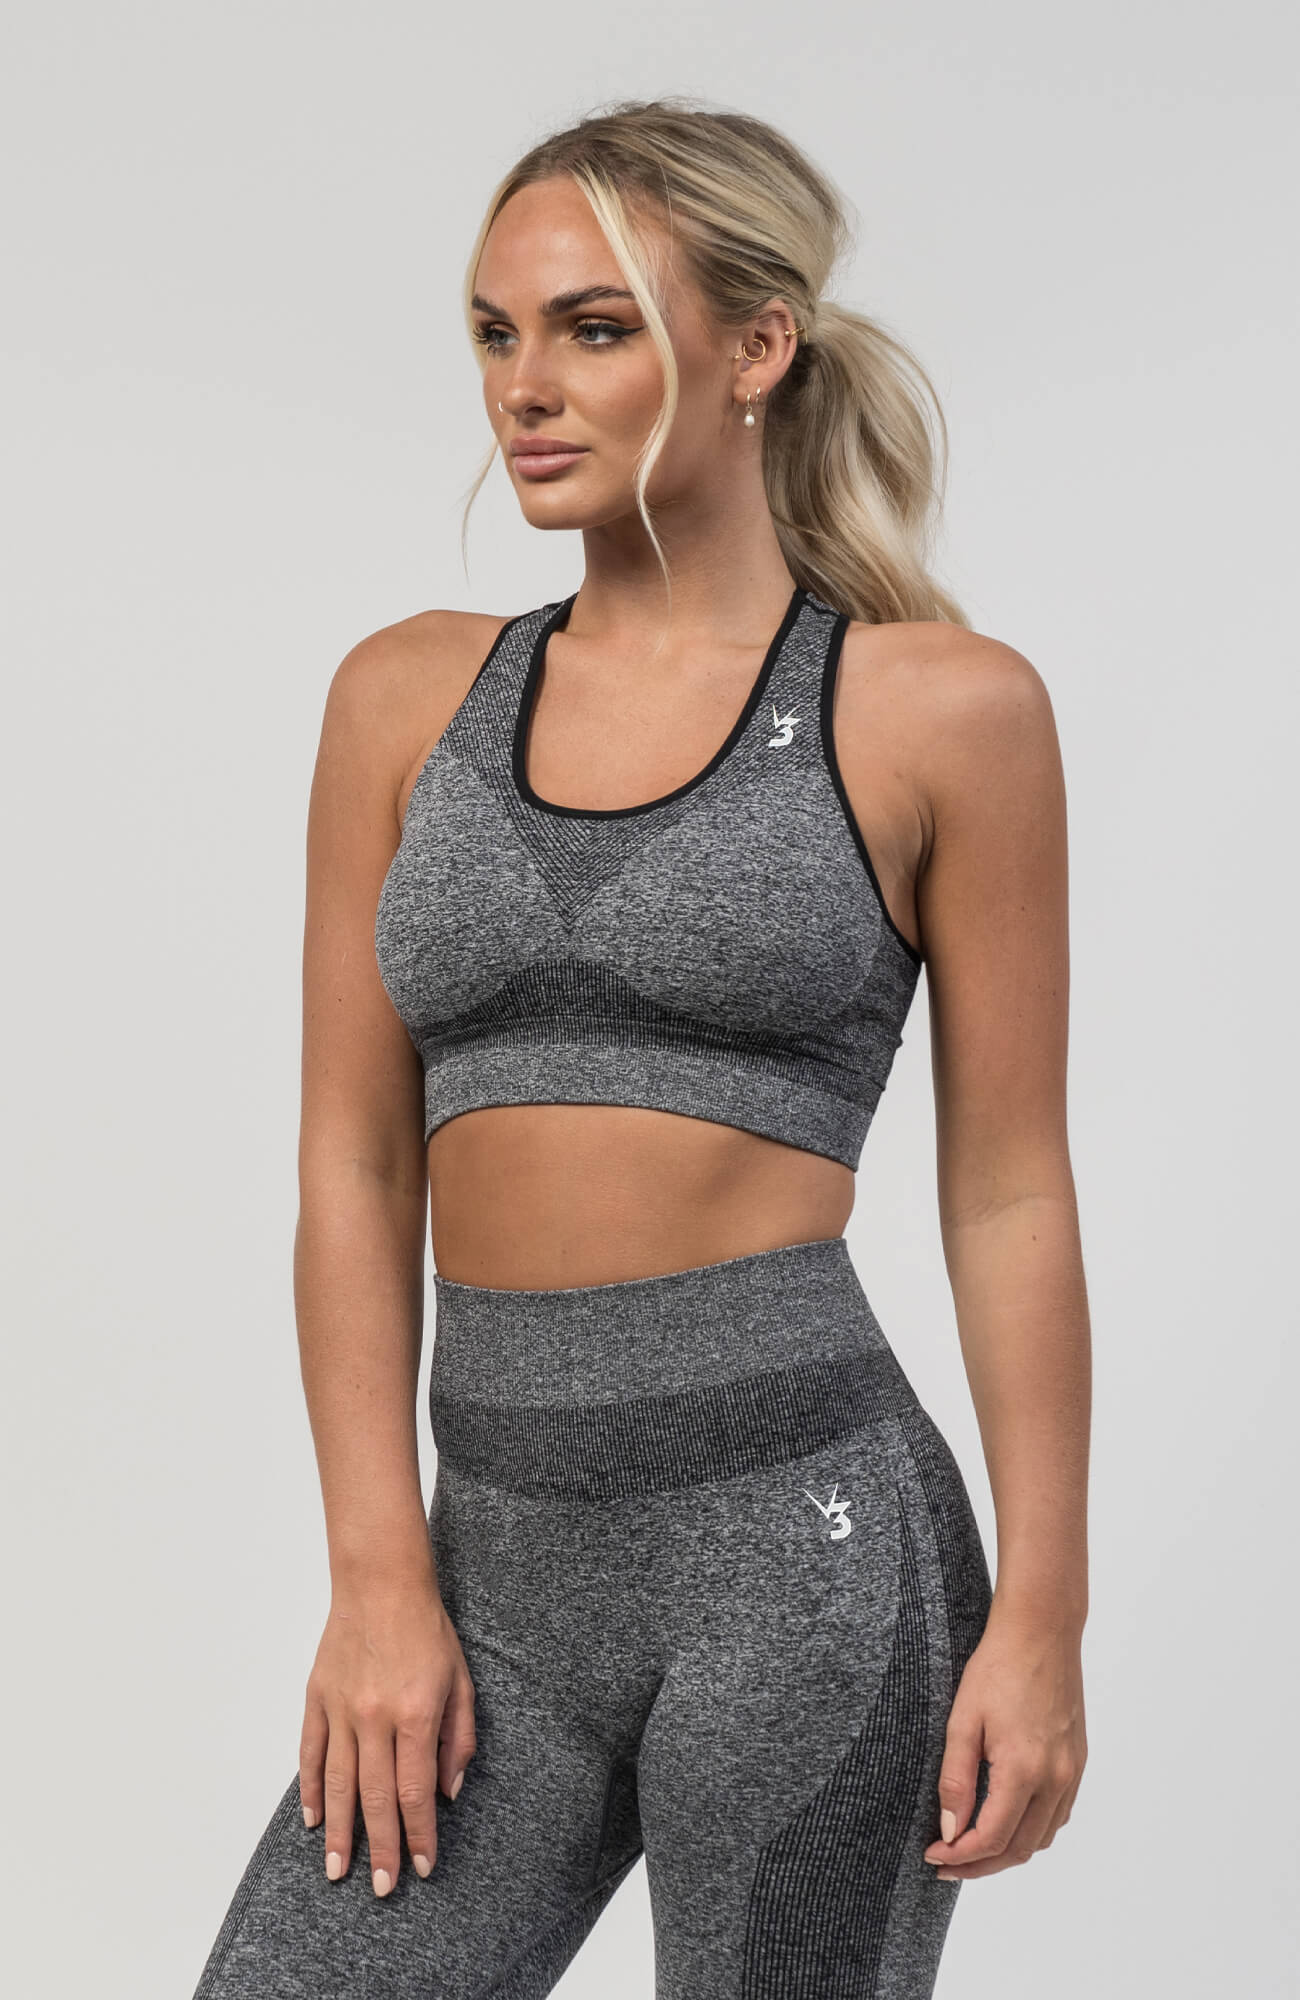 redbaysand Women's seamless Excel training sports bra in grey with removable padded cups and straps for gym workouts training, Running, yoga, bodybuilding and bikini fitness.